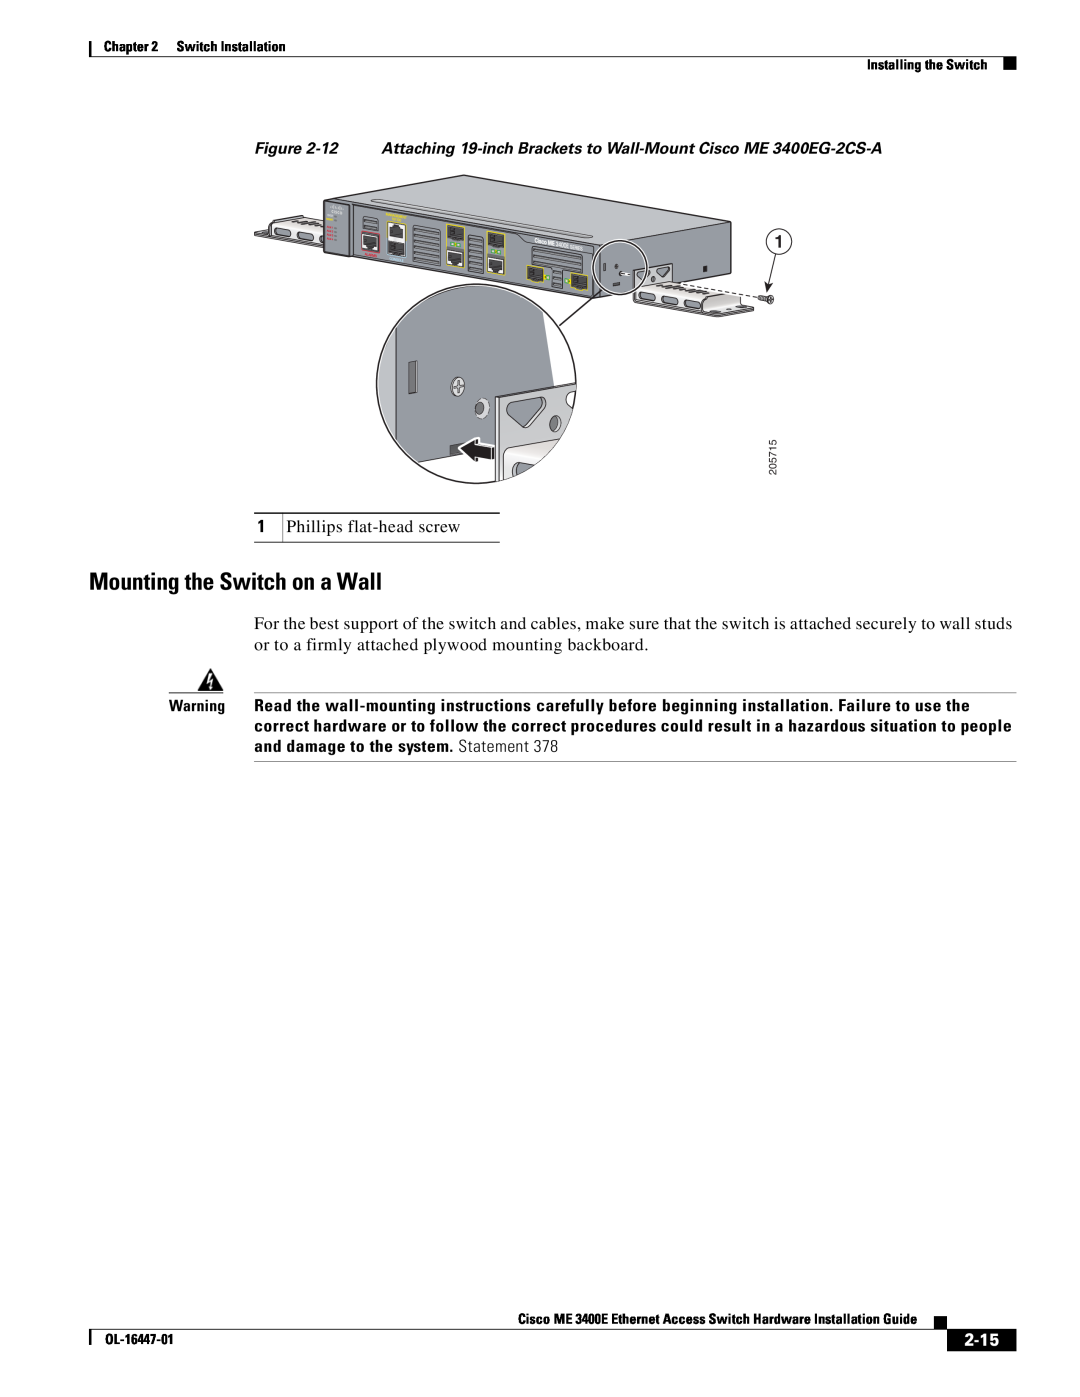 Cisco Systems OL-16447-01 manual Mounting the Switch on a Wall, 2-15, Phillips flat-head screw 